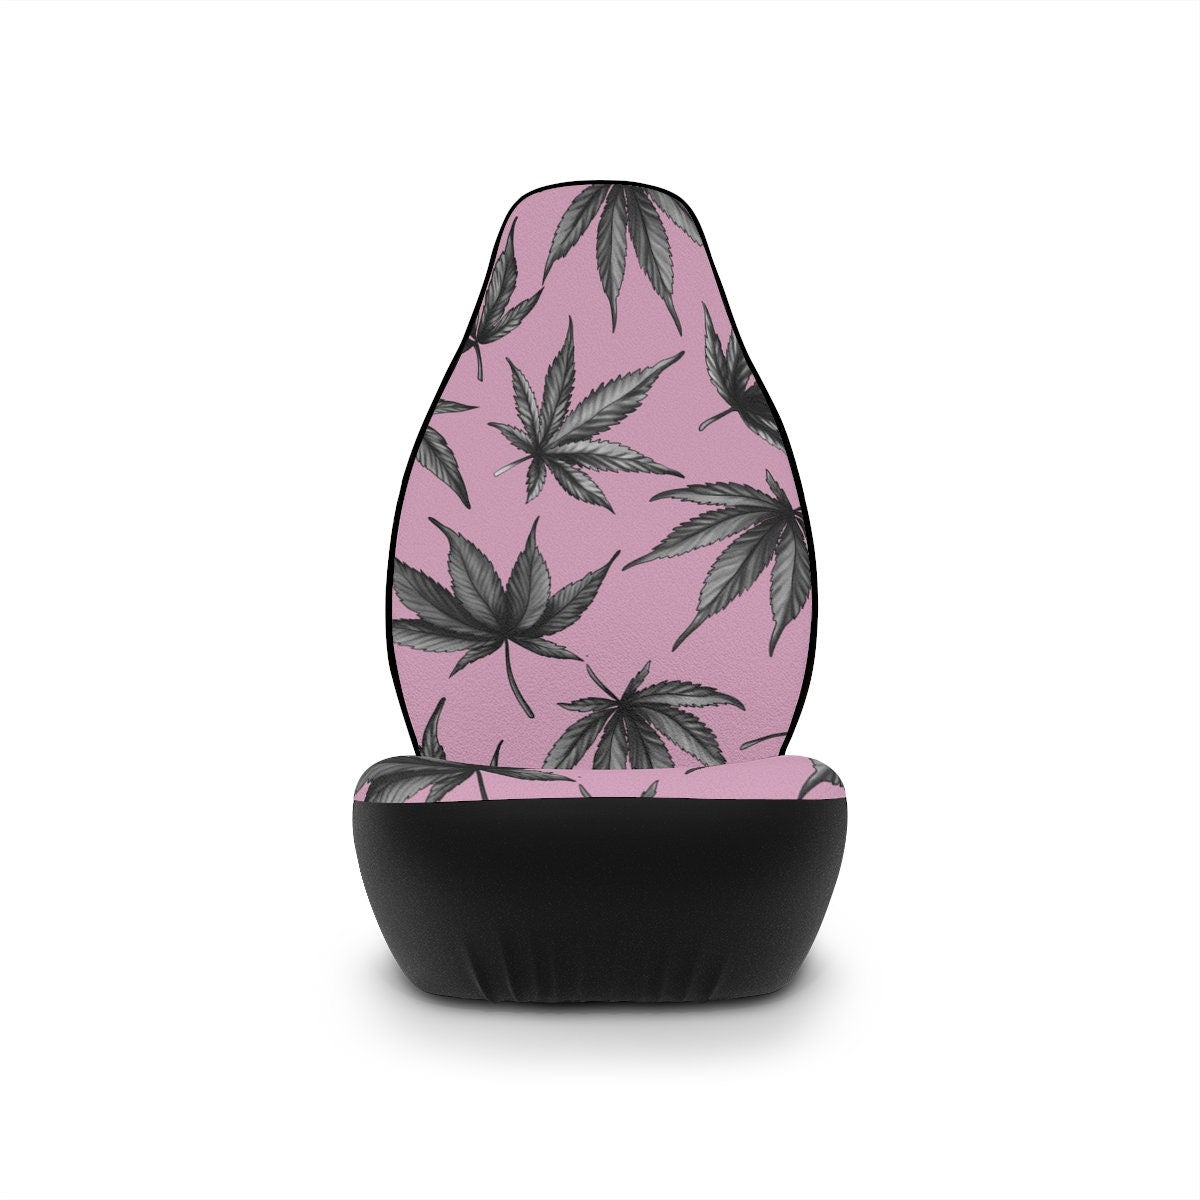 Car Seat Covers, Weed Leaf Car Accessories for Women, Pink Hippie Car Decor, Universal Chair Cover, Stoner Vehicle Seat Cover HMDesignStudioUS